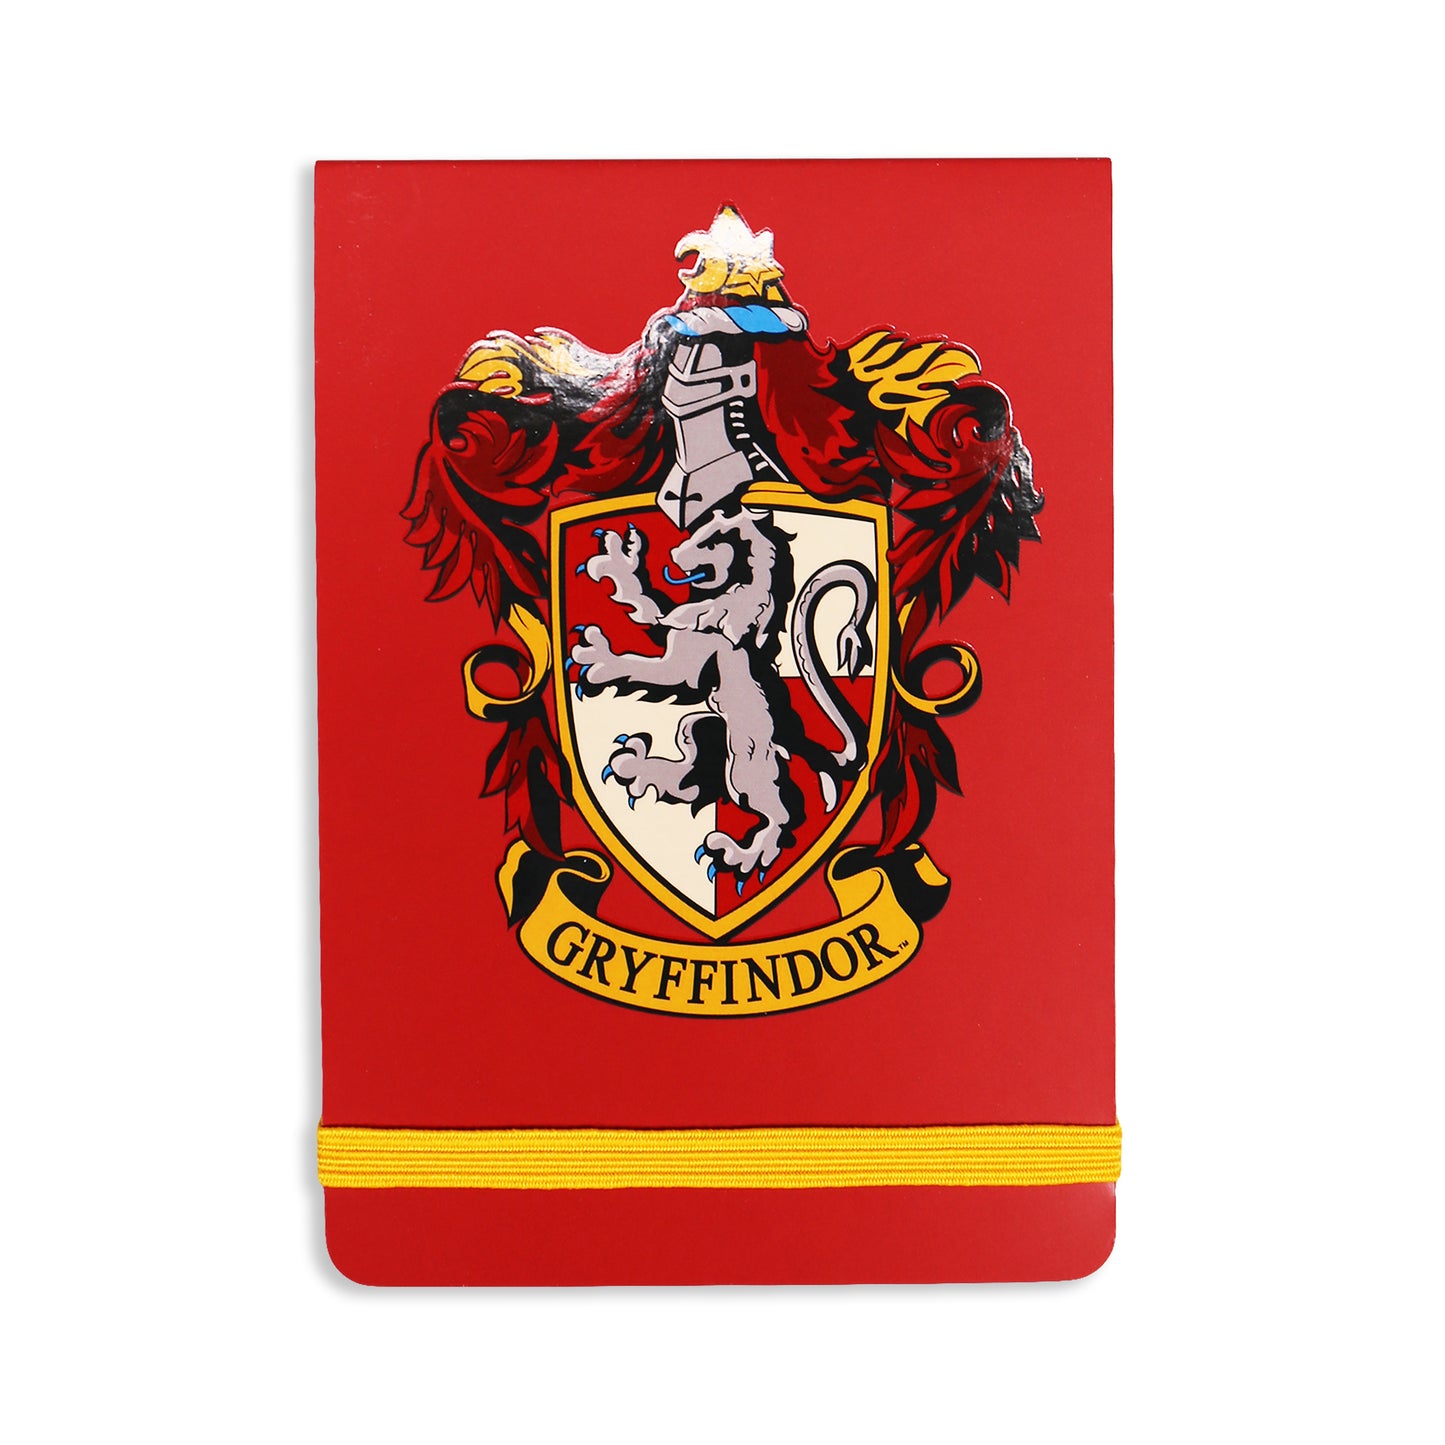 Harry Potter Gryffindor Pocket Notebook 160 Pages Official Merchandise Gift